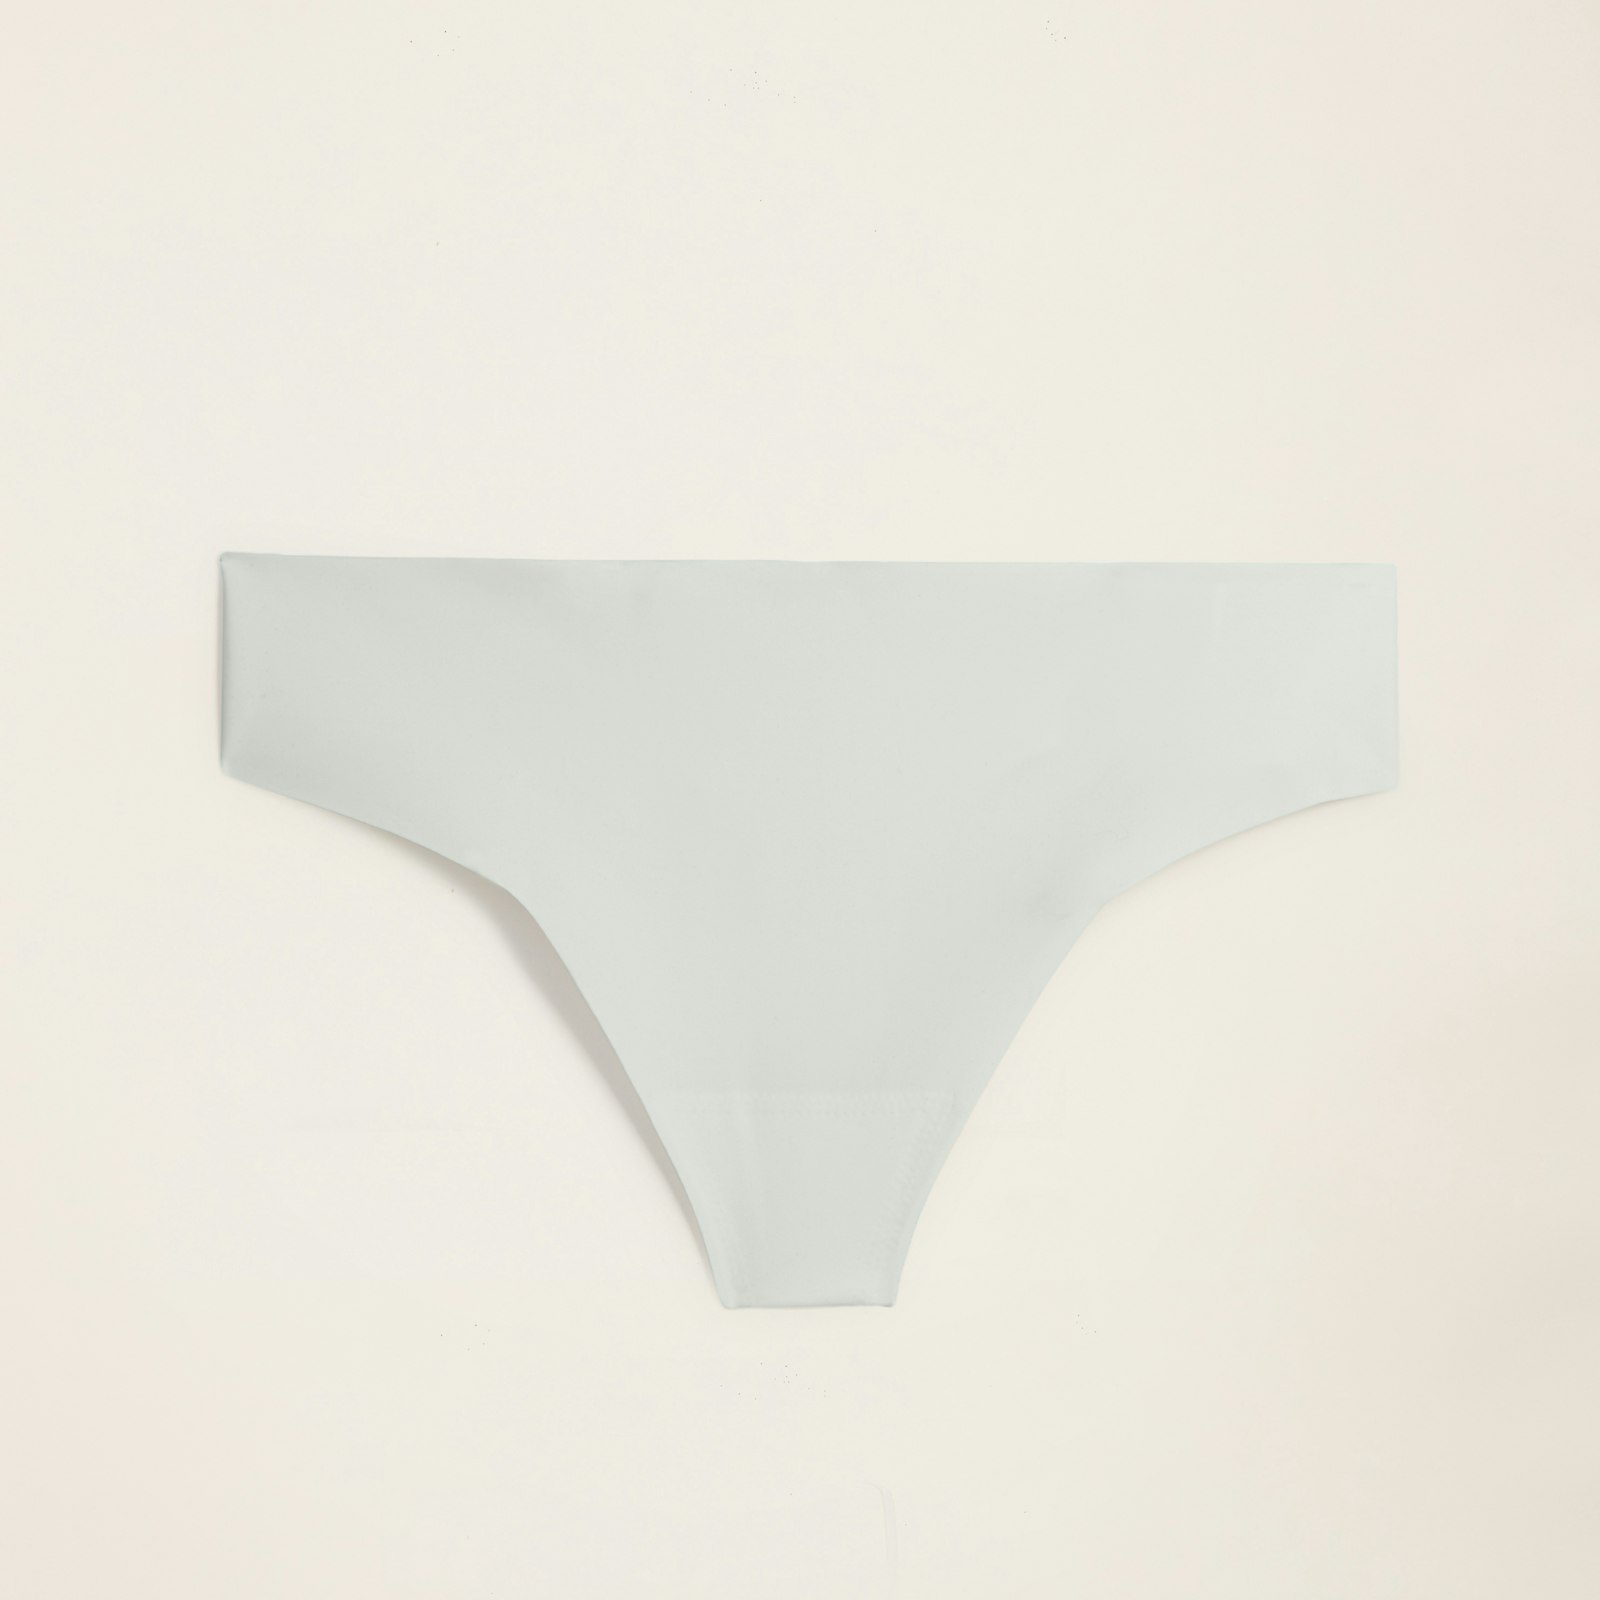 SeamlessThong_White_Womens_Product_Small_1x1_0178.jpg